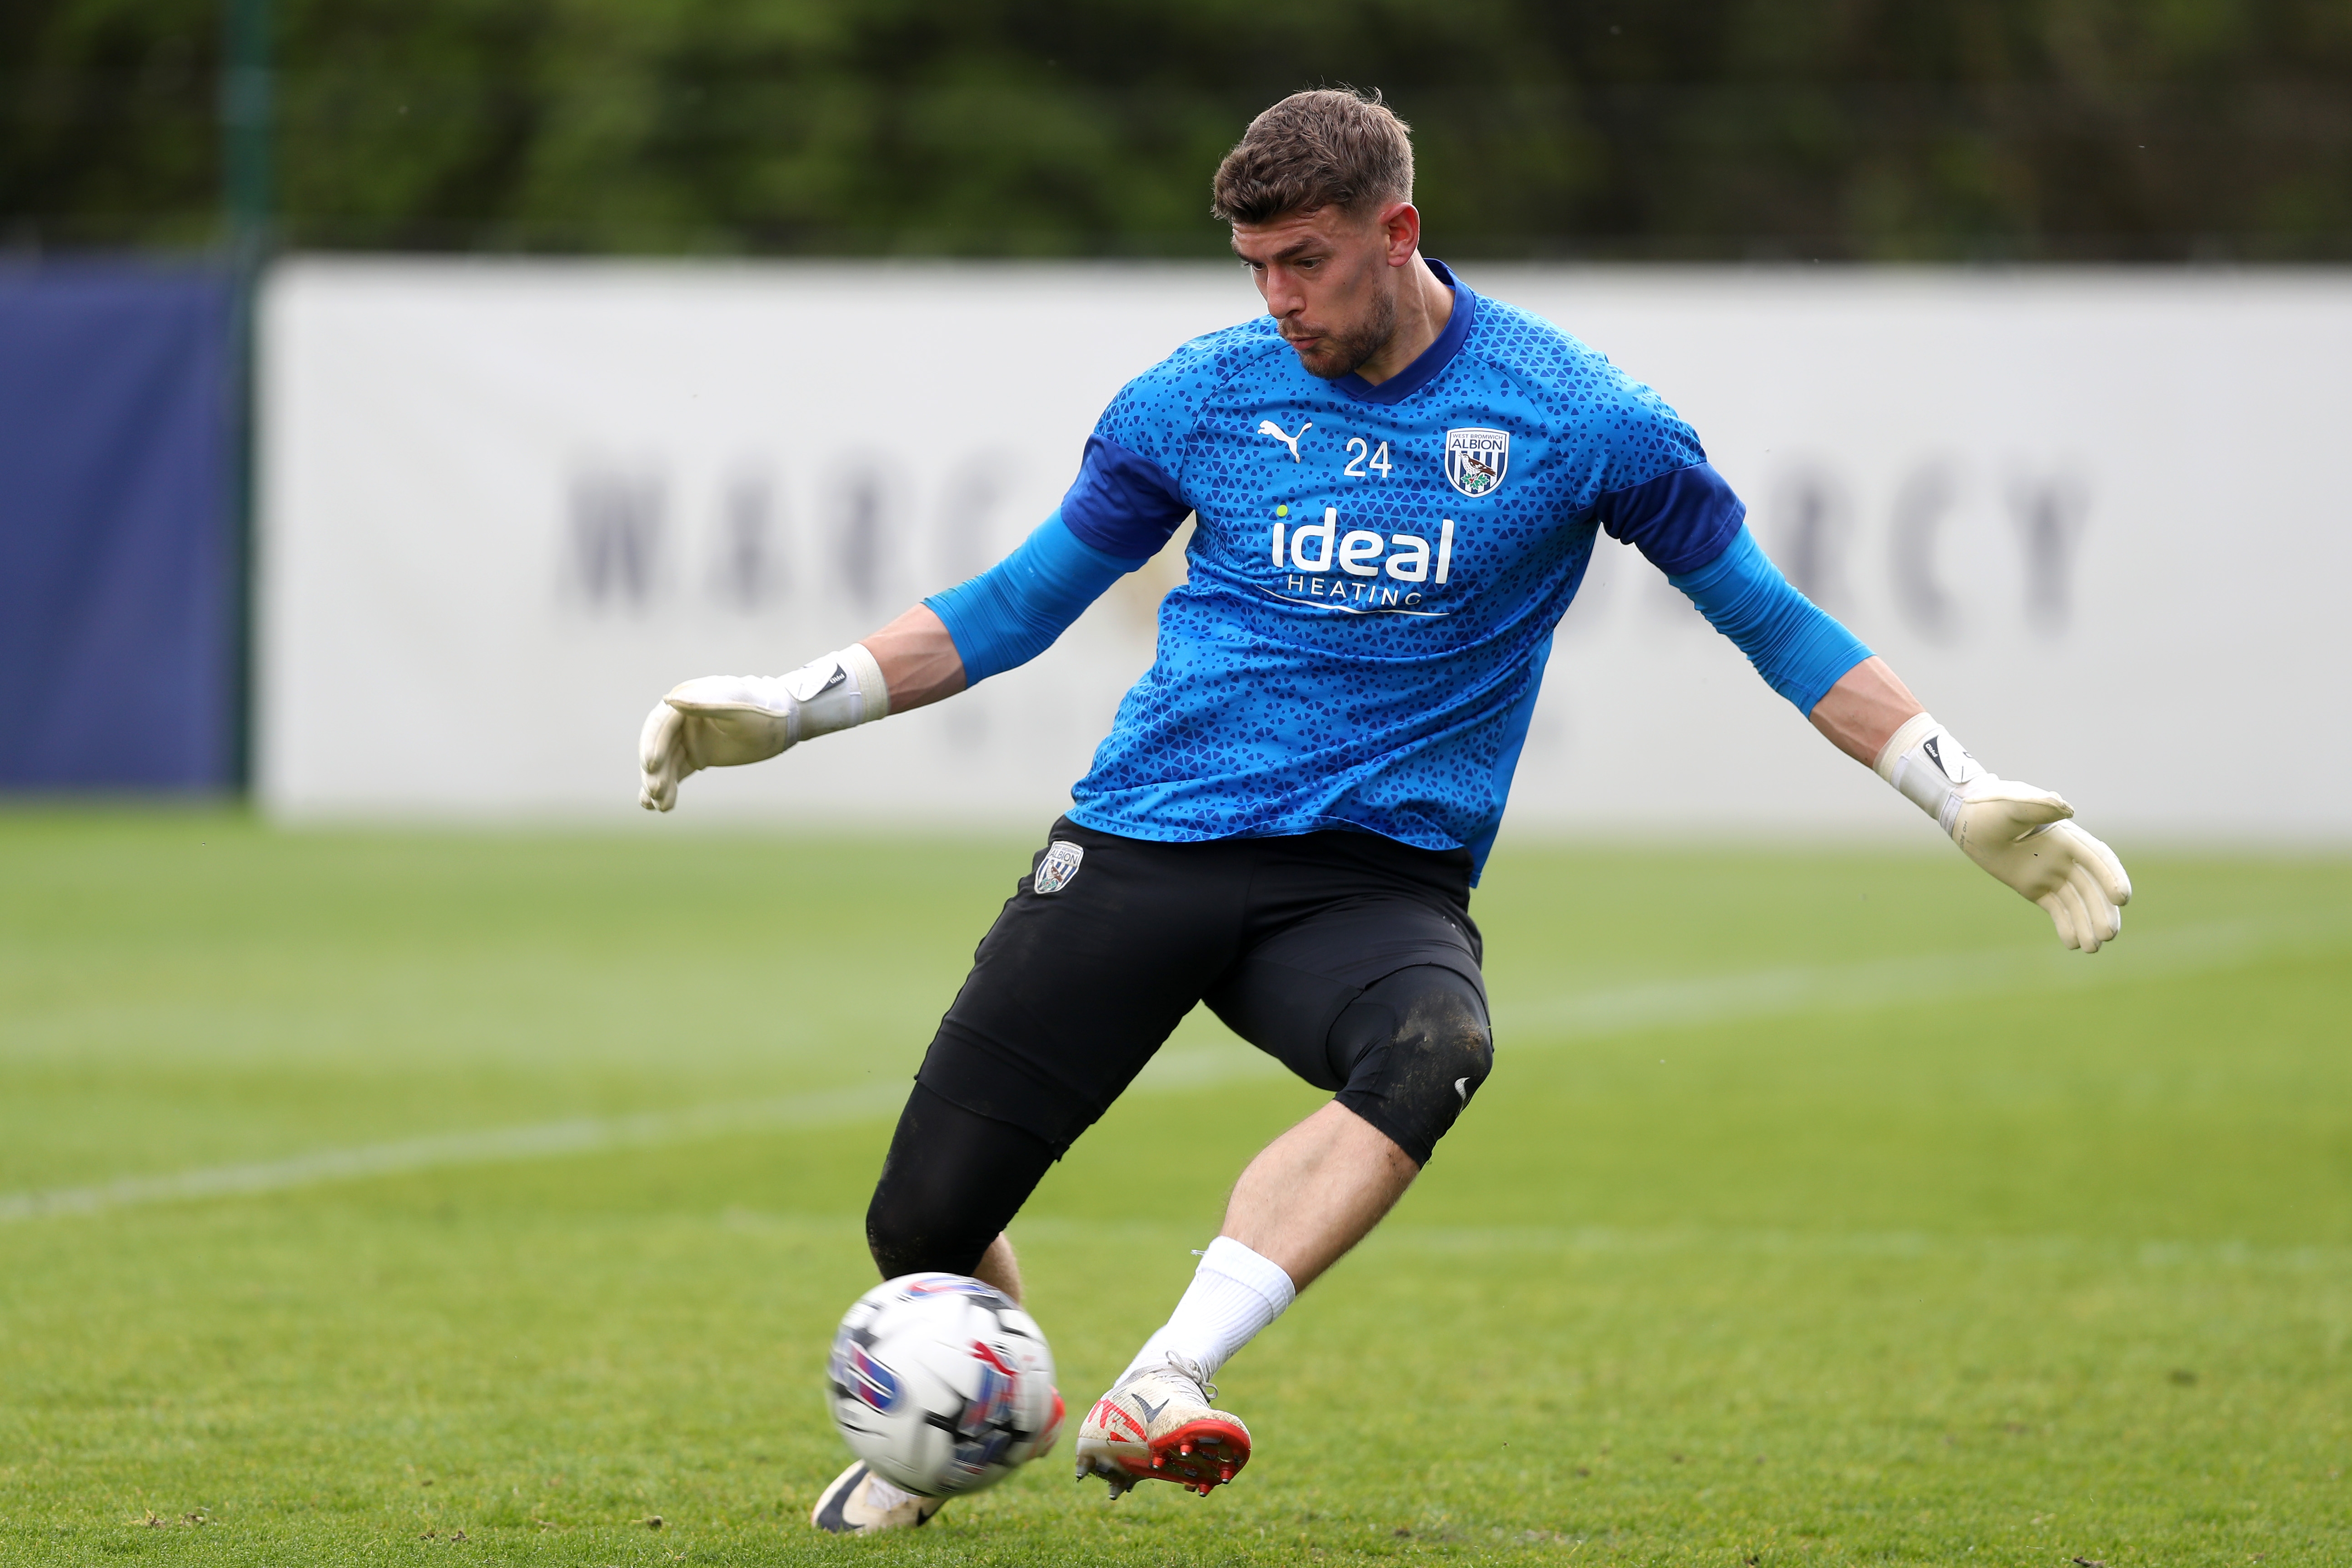 Alex Palmer making a save with his feet in training